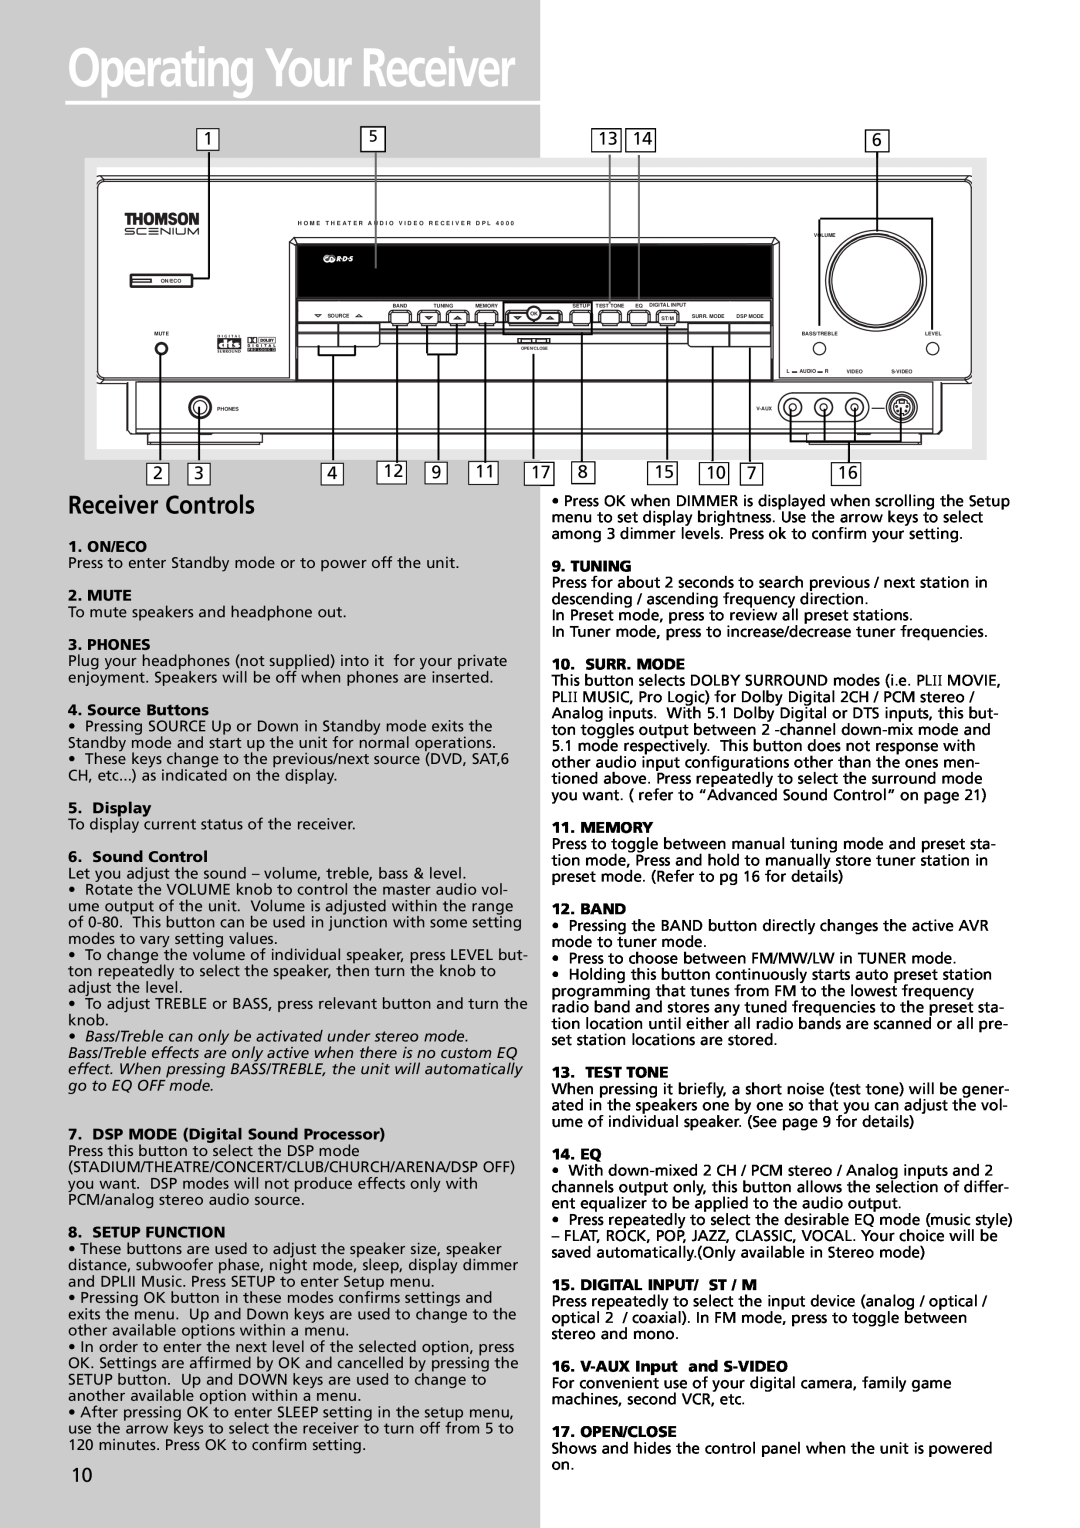 Technicolor - Thomson DPL4000 manual Operating Your Receiver, Receiver Controls 